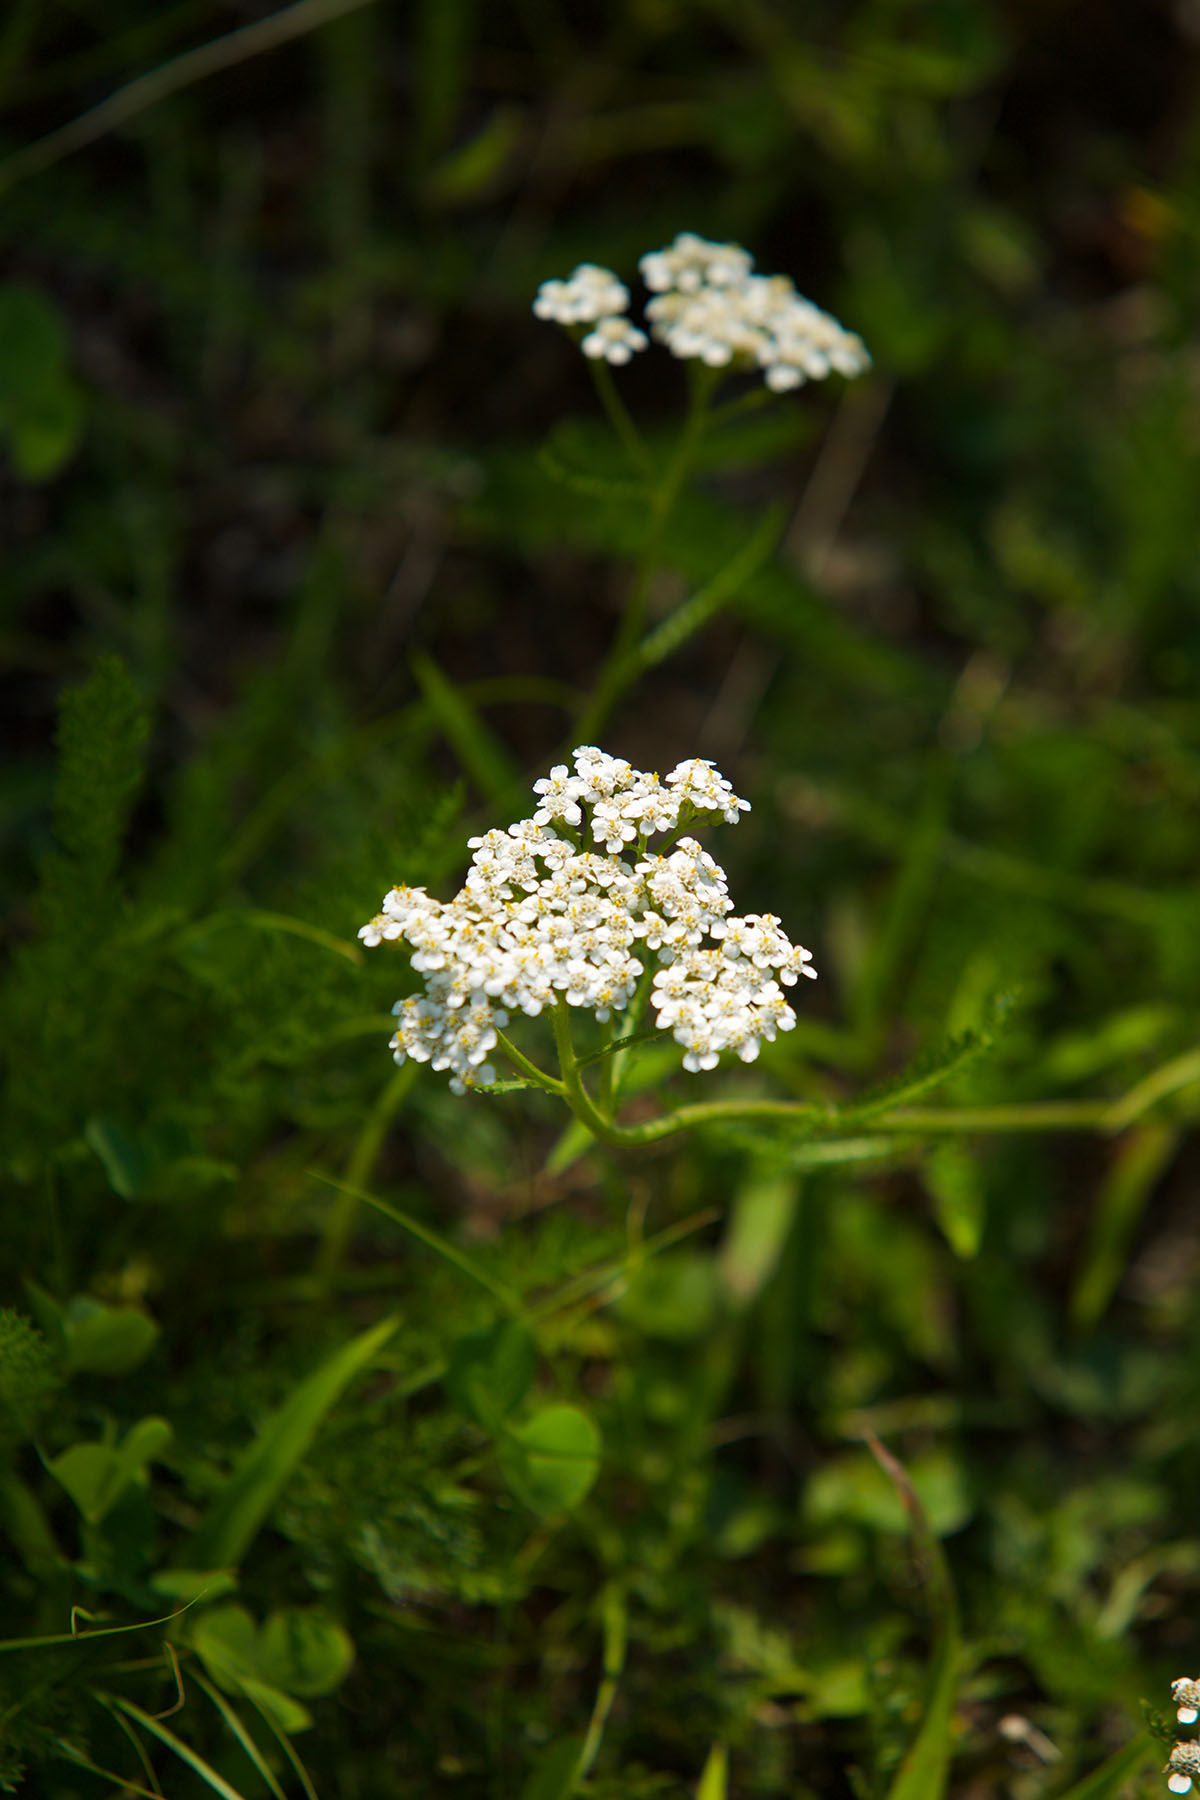 Adding Yarrow To Your Materia Medica | Herbal Academy | Would you like to add yarrow to your materia medica? Here's how to correctly identify and safely use this beneficial herb!